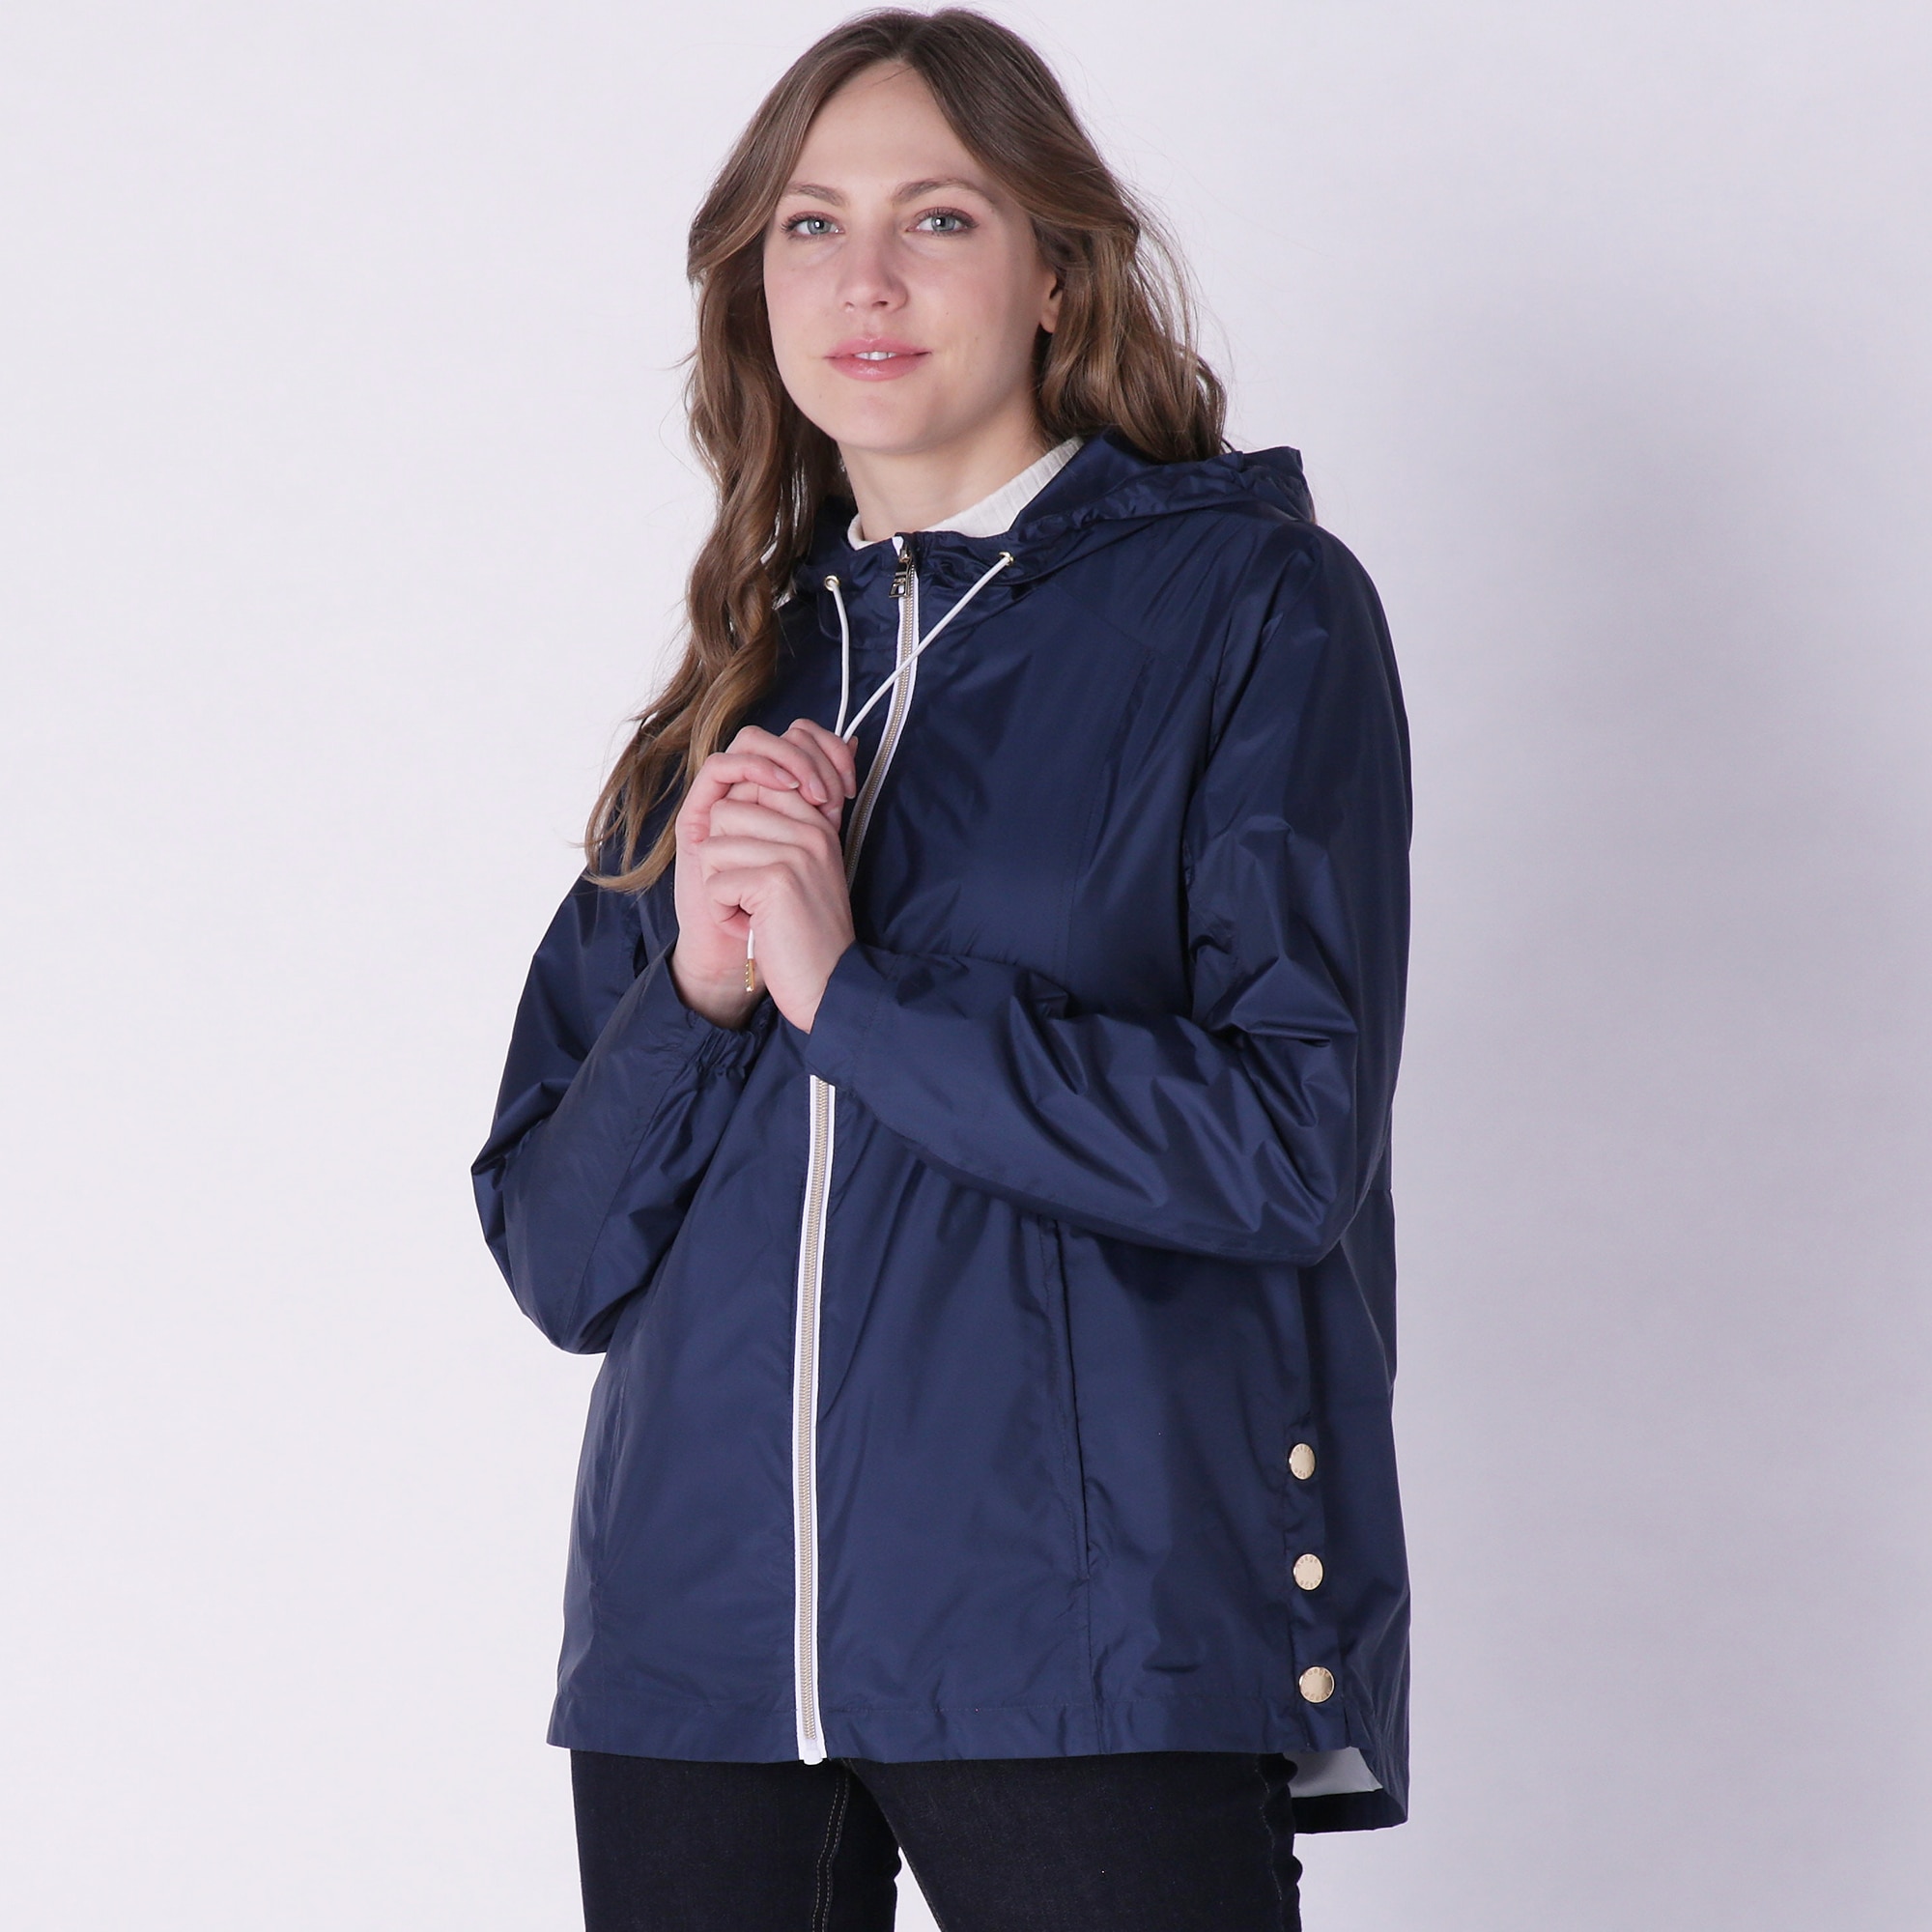 Nuage Hooded Water Repellent Jacket With Side Snaps